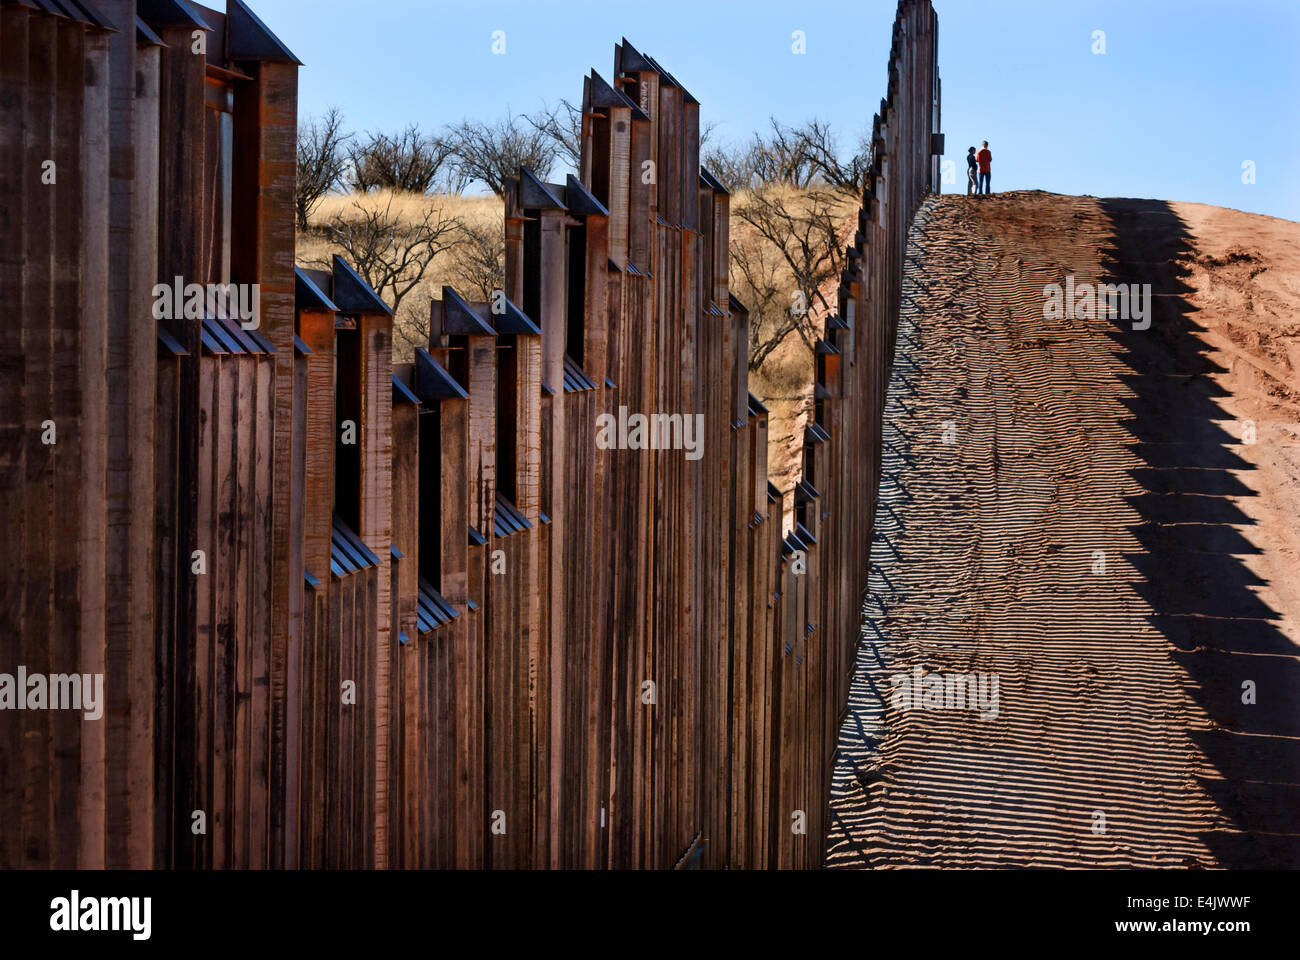 Massive US border fence on border with Mexico, about 6 miles east of Nogales Arizona, USA, looking west, viewed from US side Stock Photo